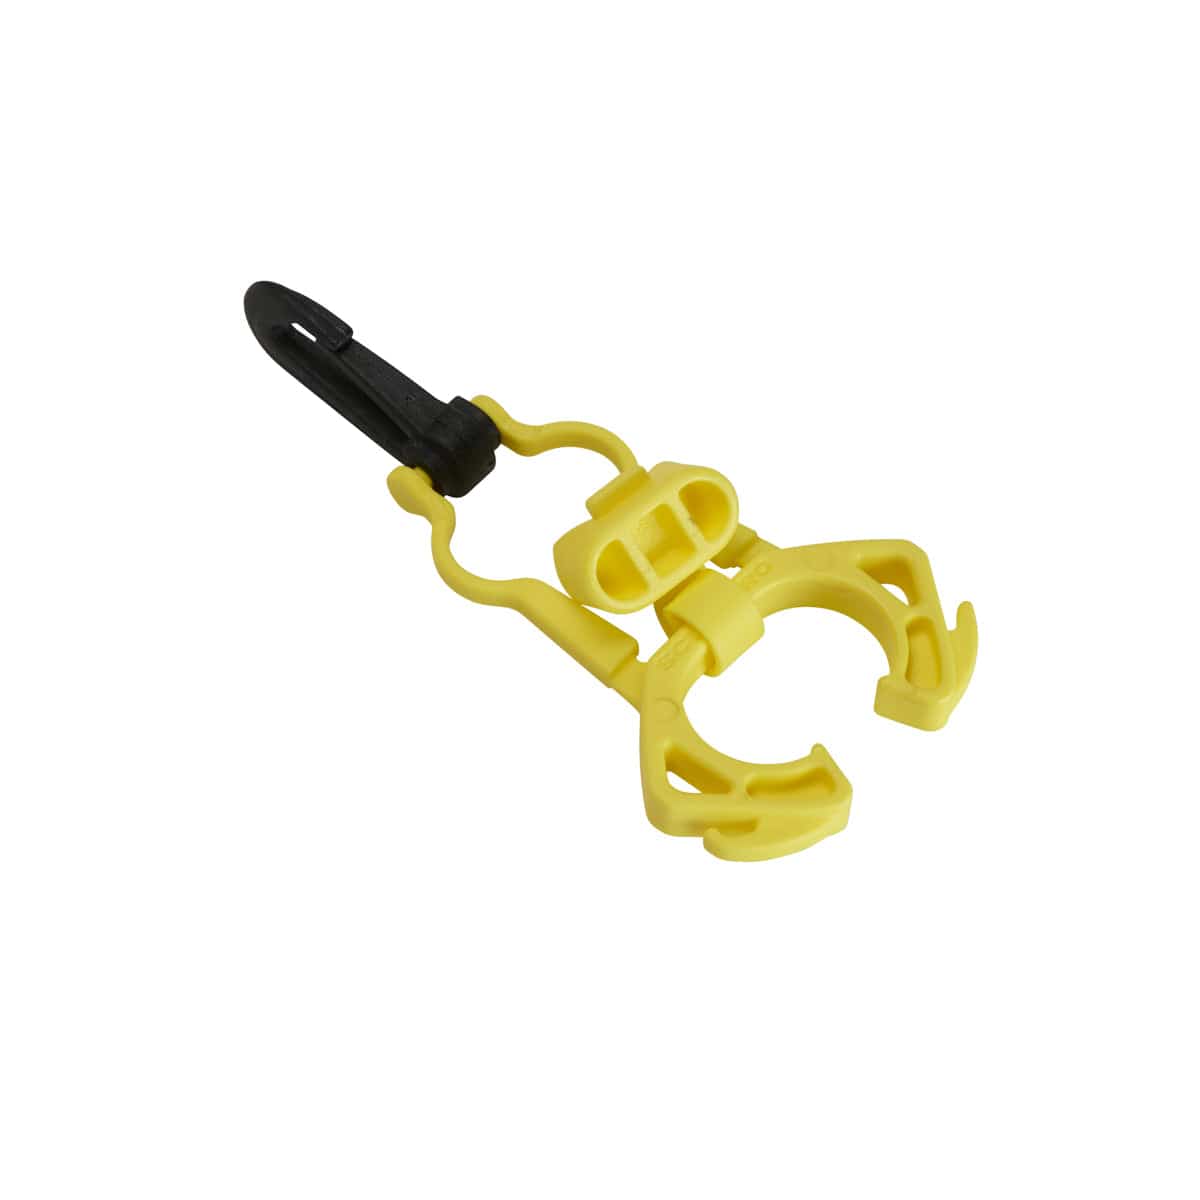 ScubaPro Related Yellow Scubapro Octopus Retainer and Plug w/clip